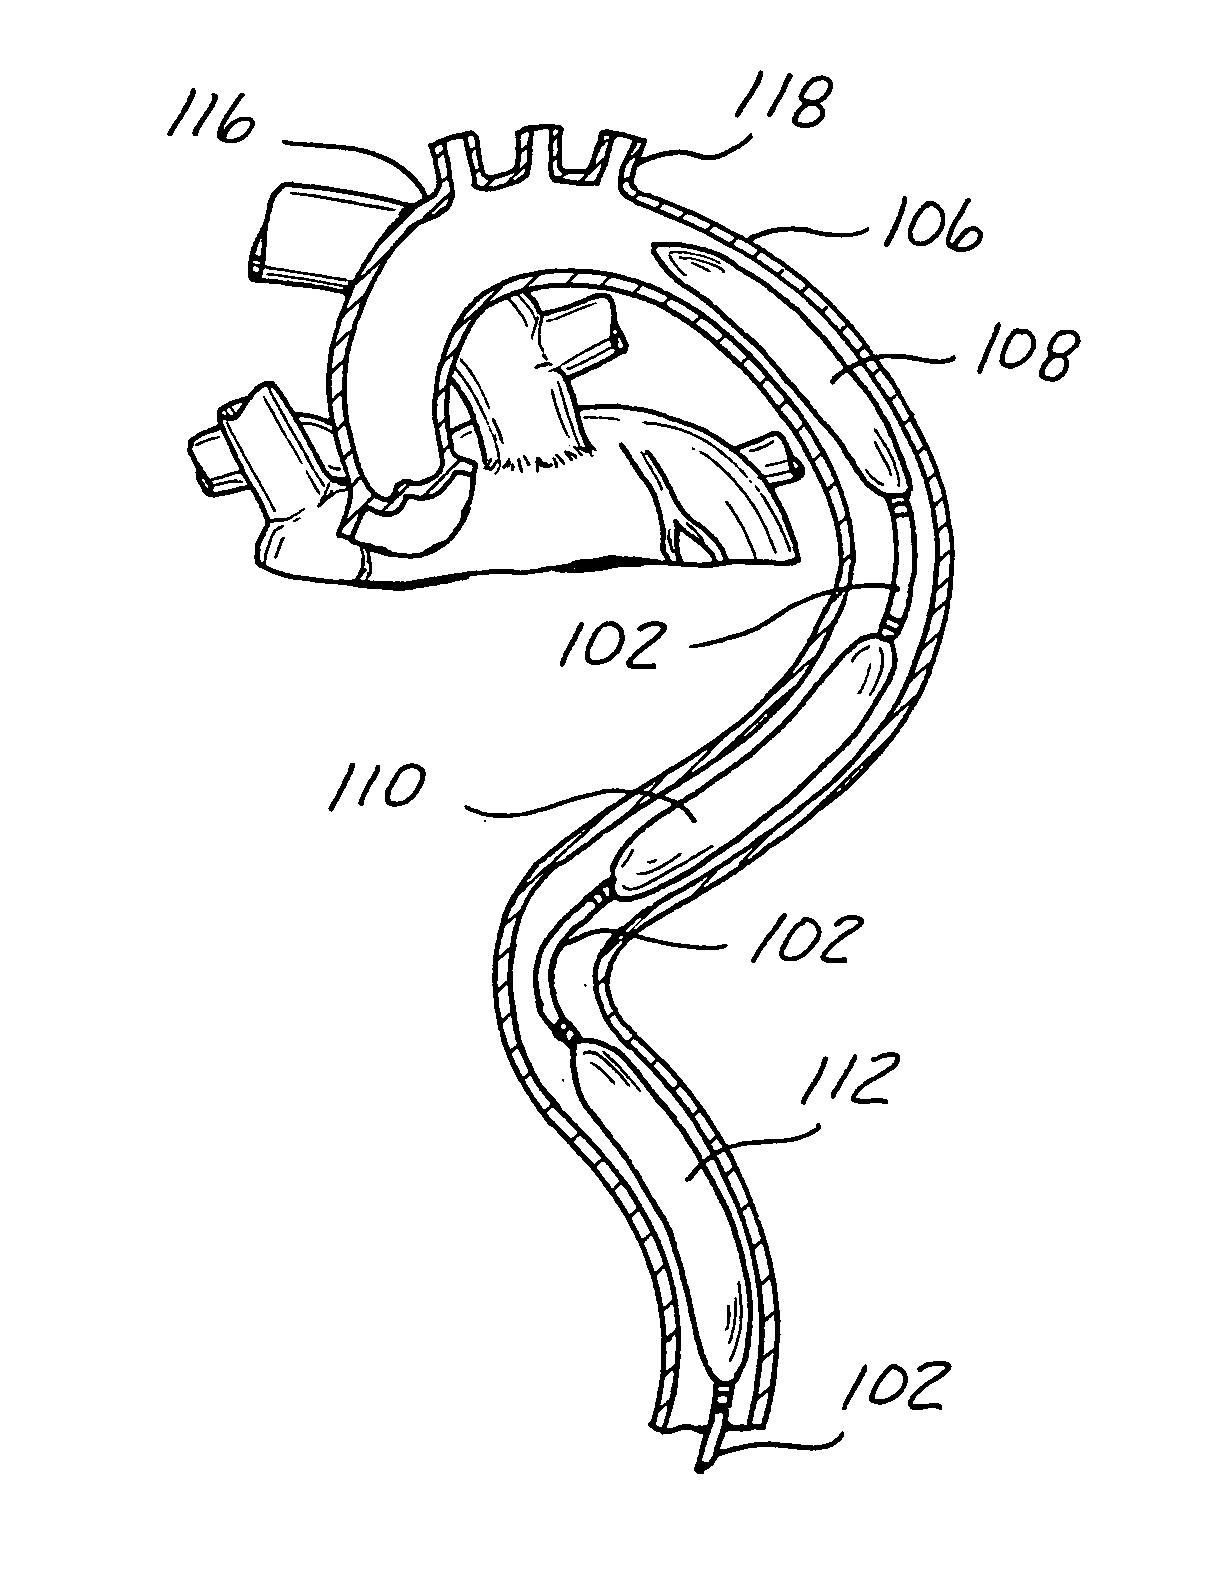 Long term ambulatory intra-aortic balloon pump with three dimensional tortuous shape